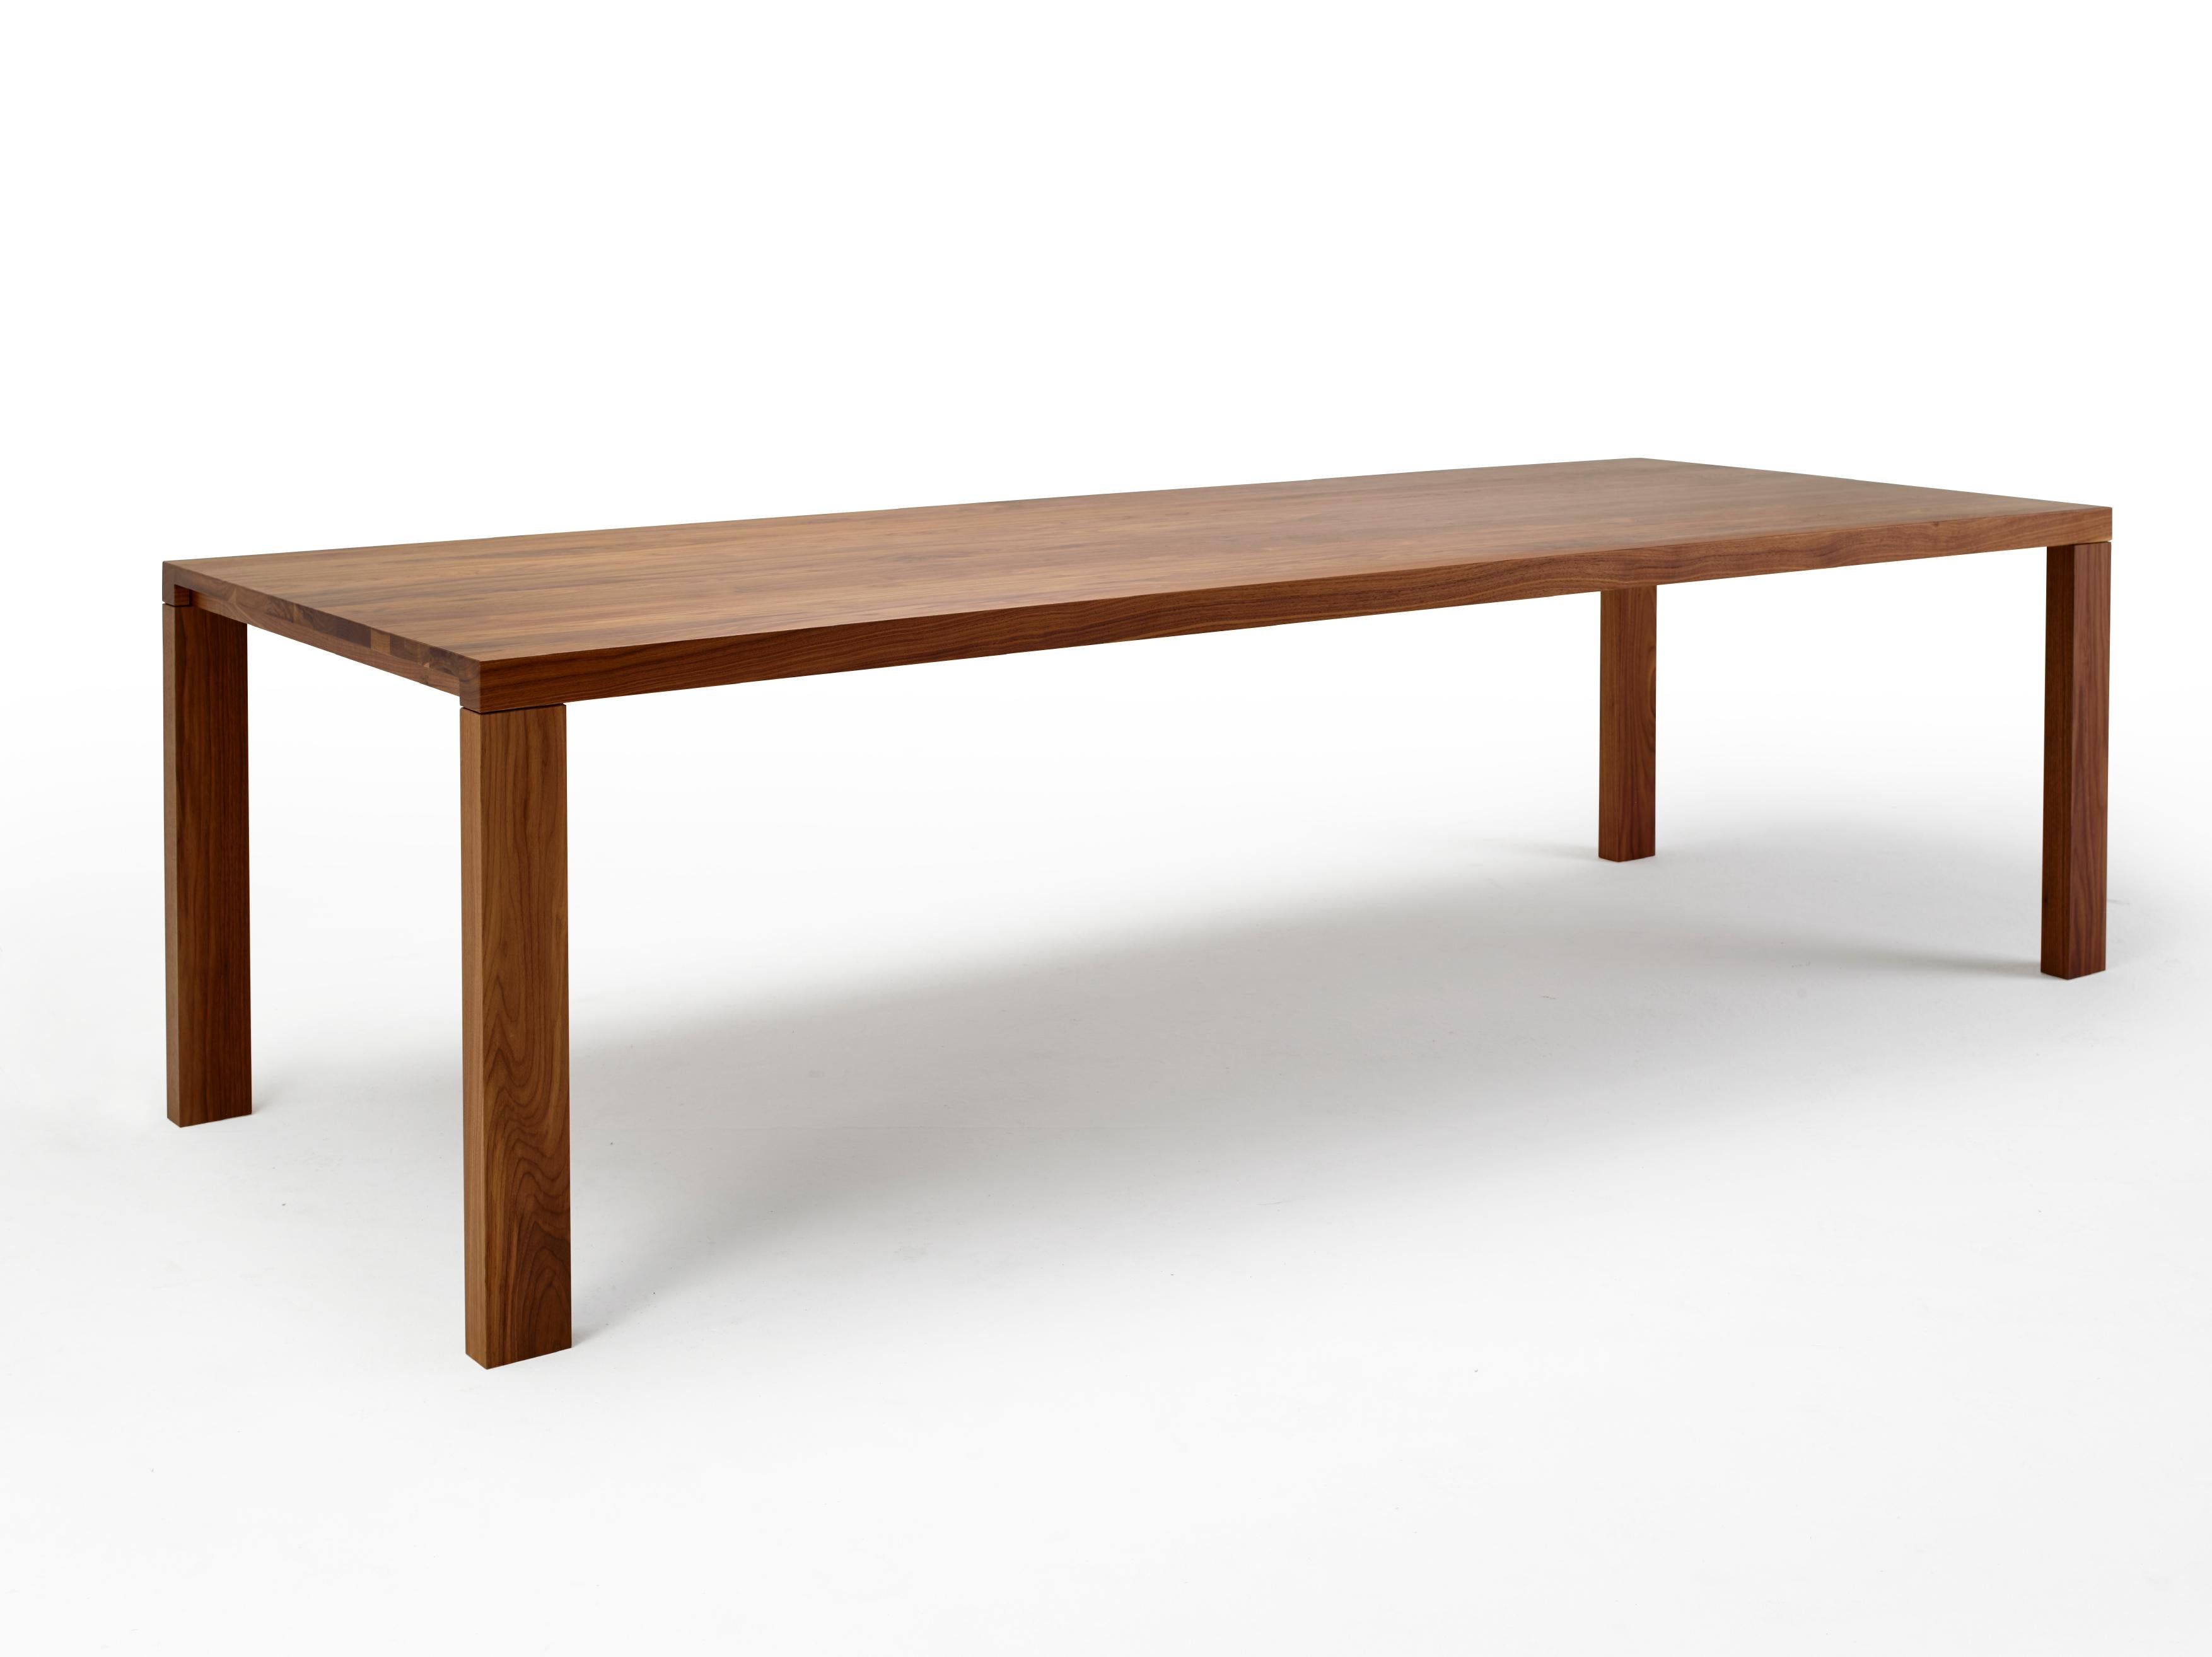 Cusstomizable Arco Essenza Rectangular Wood Table by Willem Van Ast In New Condition For Sale In New York, NY